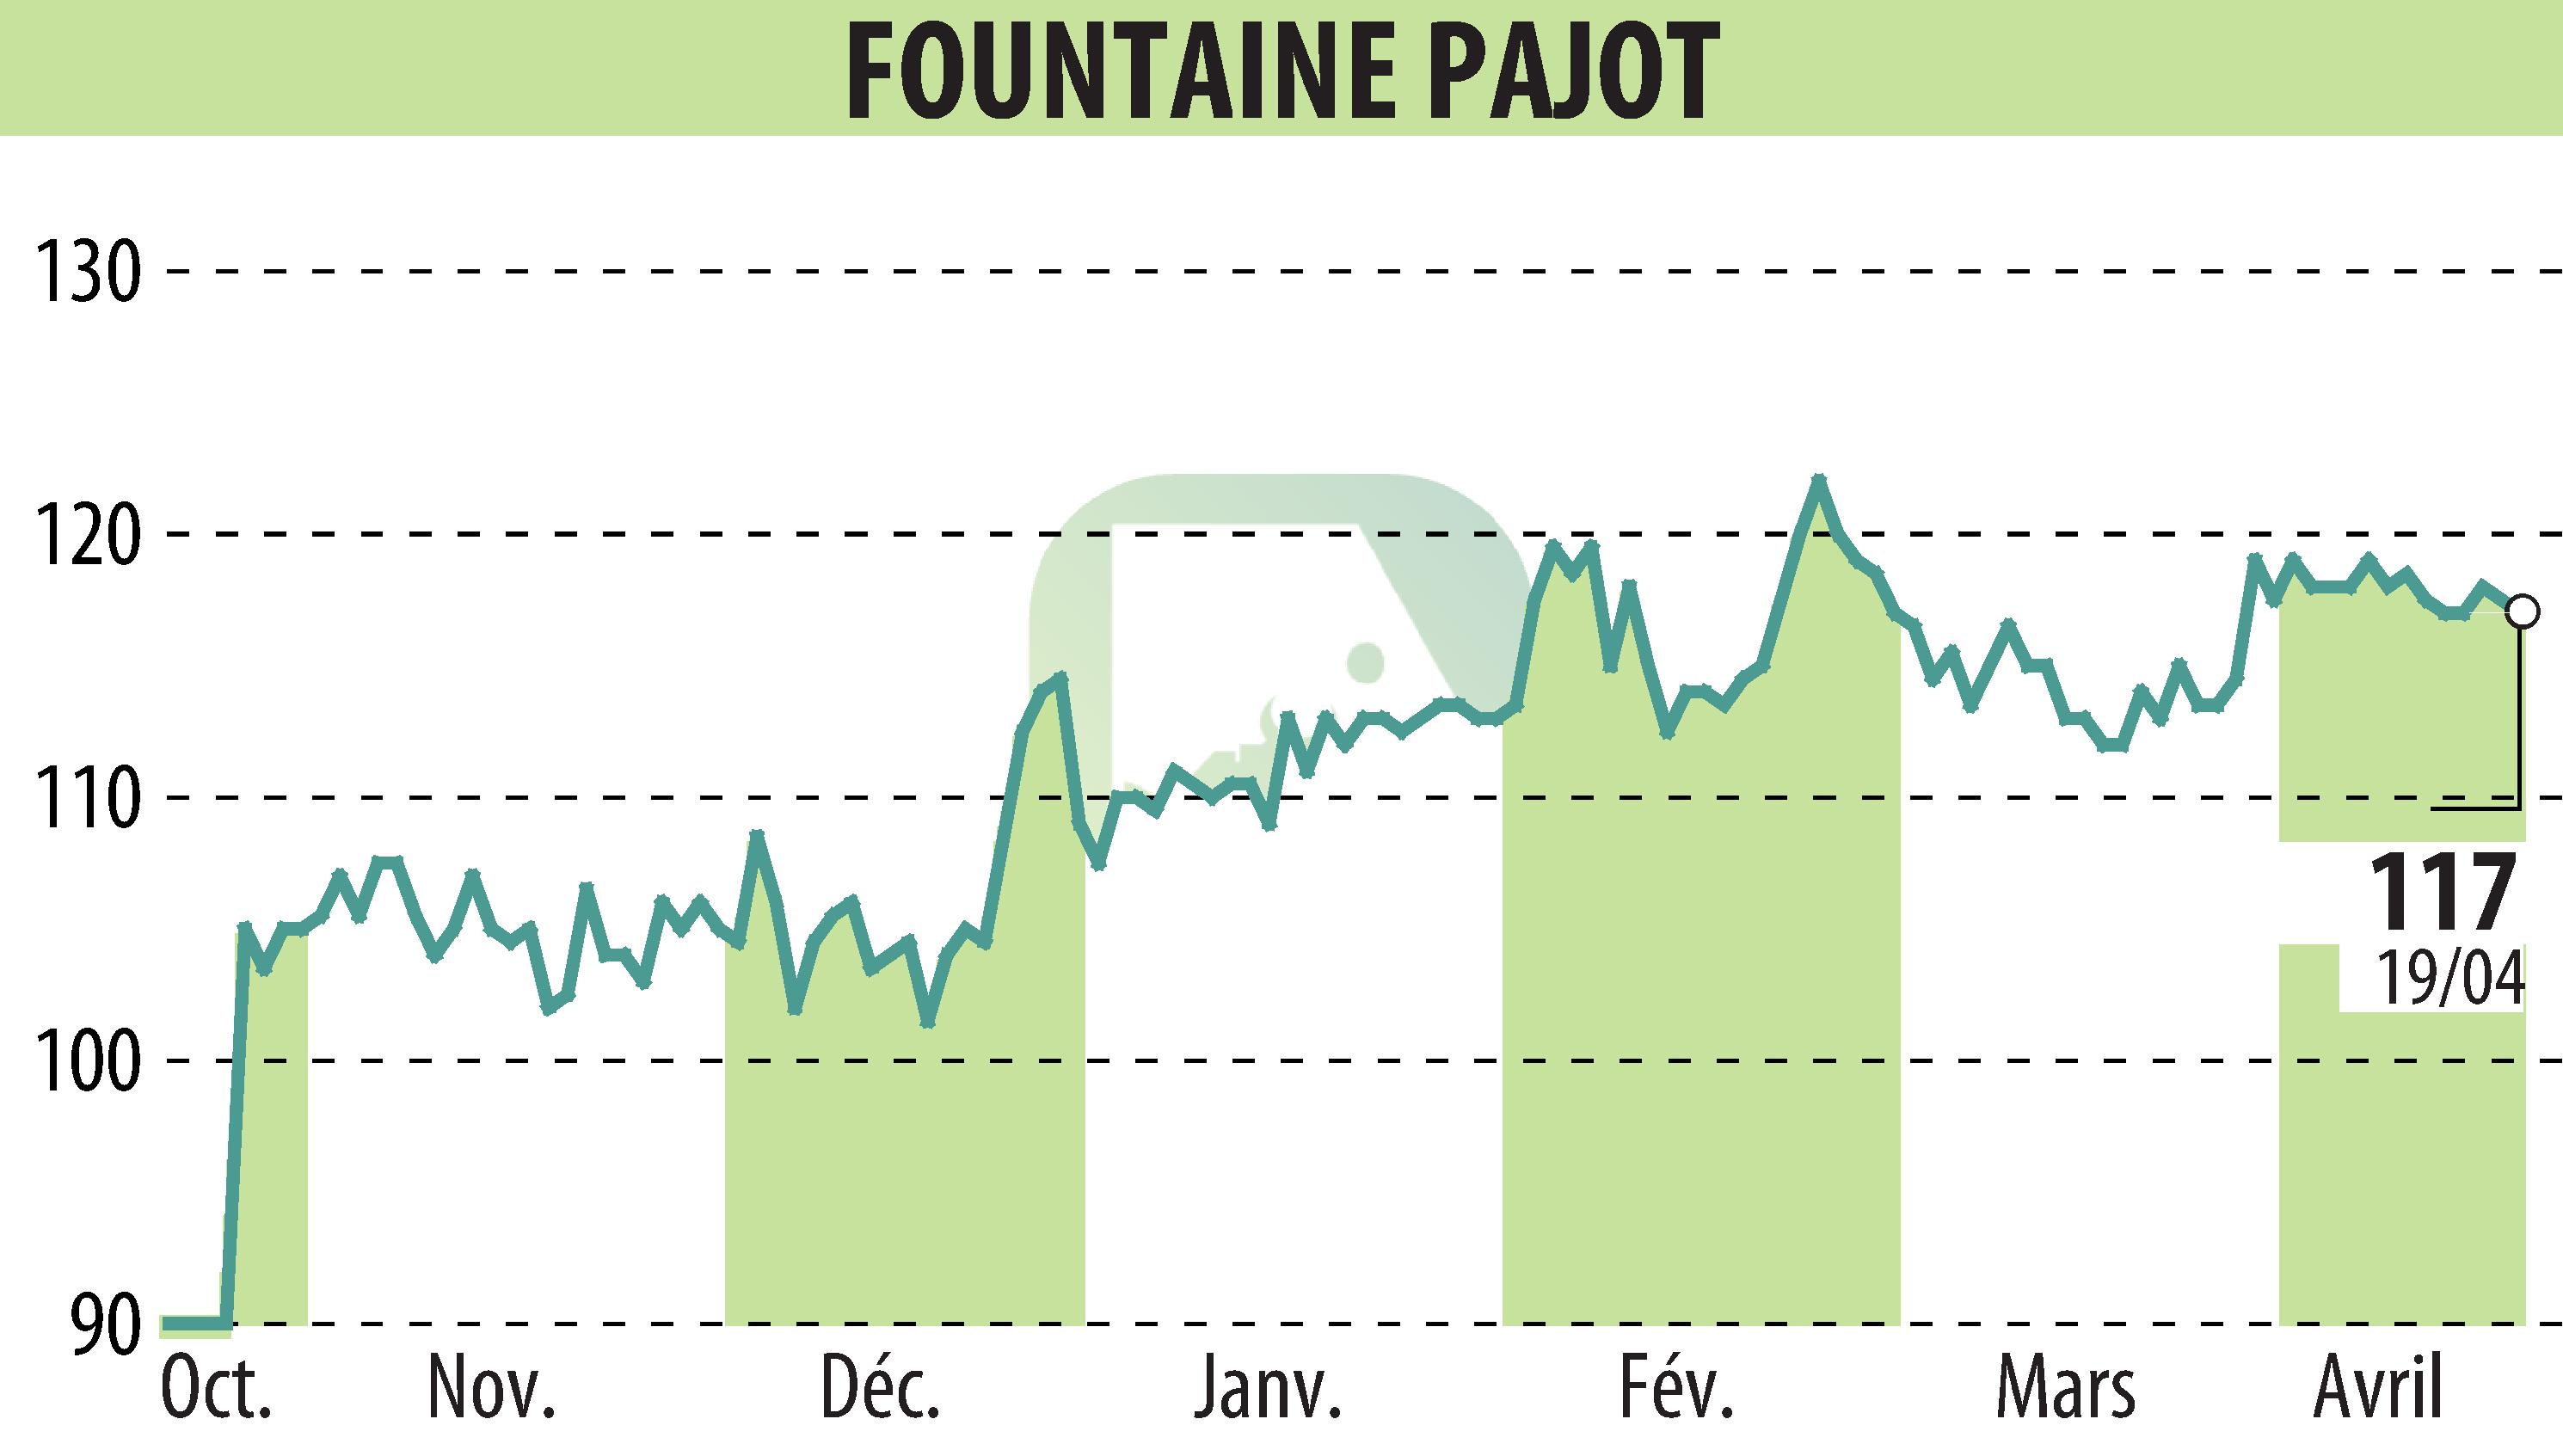 Stock price chart of FOUNTAINE PAJOT (EPA:ALFPC) showing fluctuations.